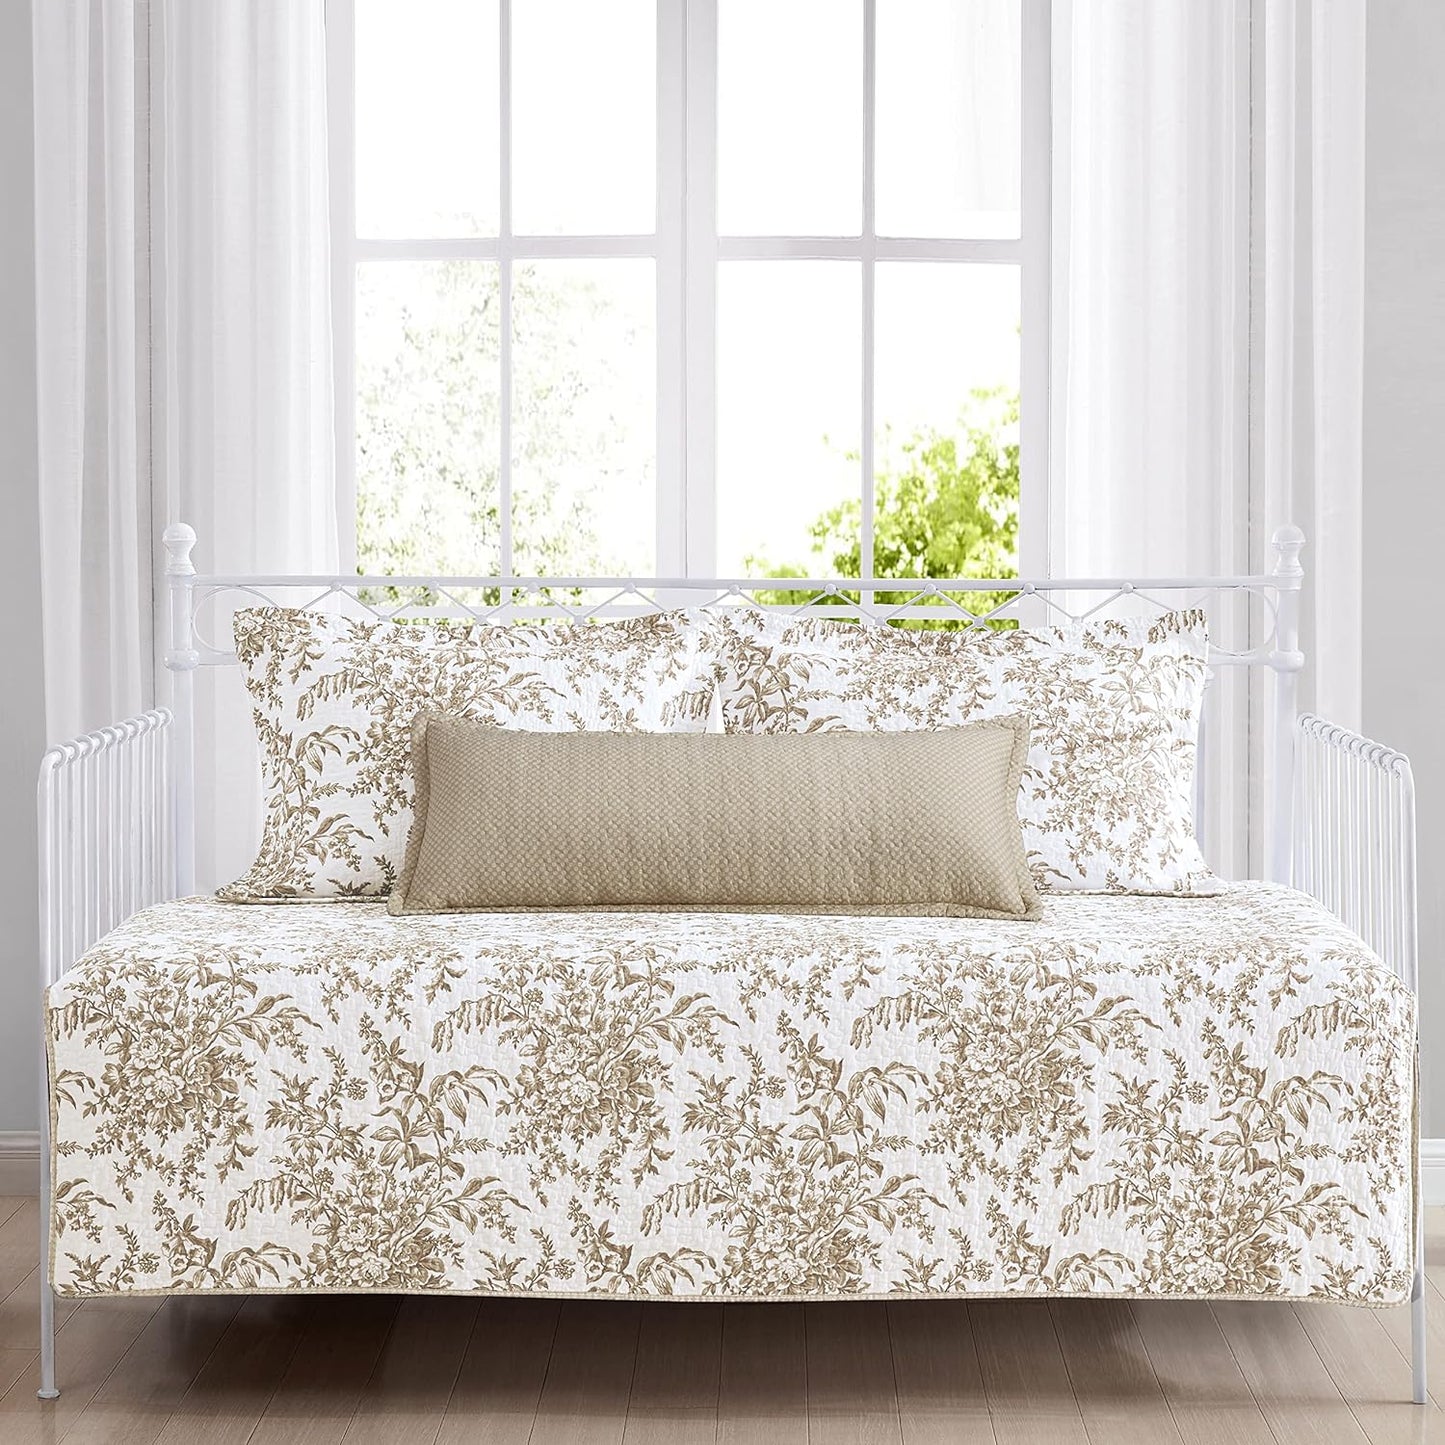 Laura Ashley Home | Bedford Collection | Quilt Set - 100% Cotton, Lightweight & Breathable, Reversible Bedding, Pre-Washed for Added Softness, Daybed, Mocha